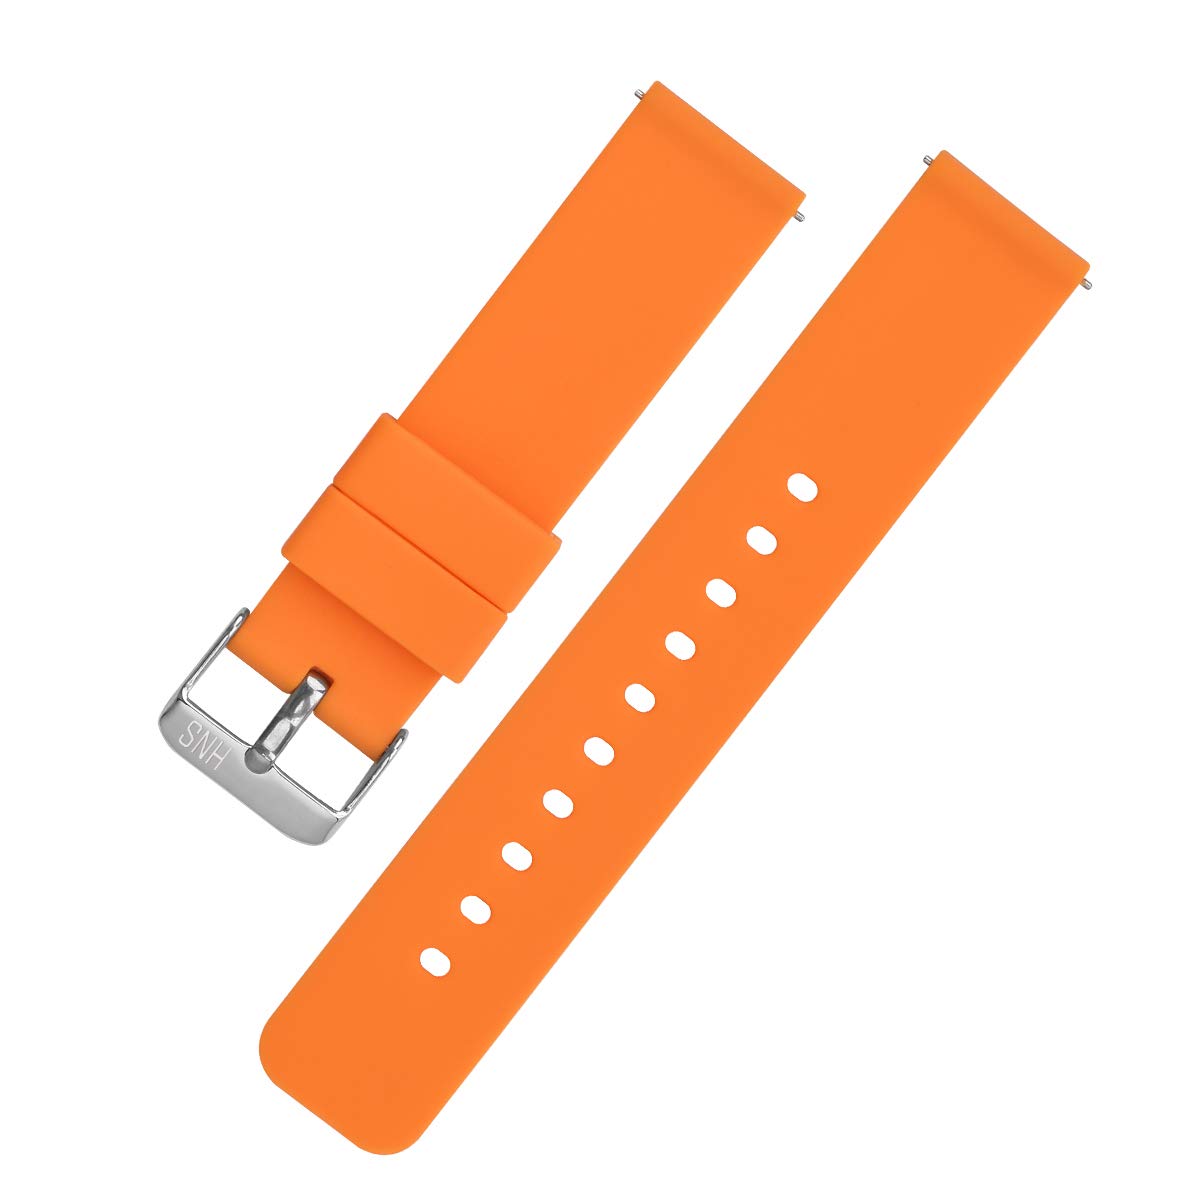 HNS Watch Bands - Soft Silicone Quick Release Straps - Choose Color & Width - 18mm, 20mm, 22mm - Soft Rubber Watch Bands